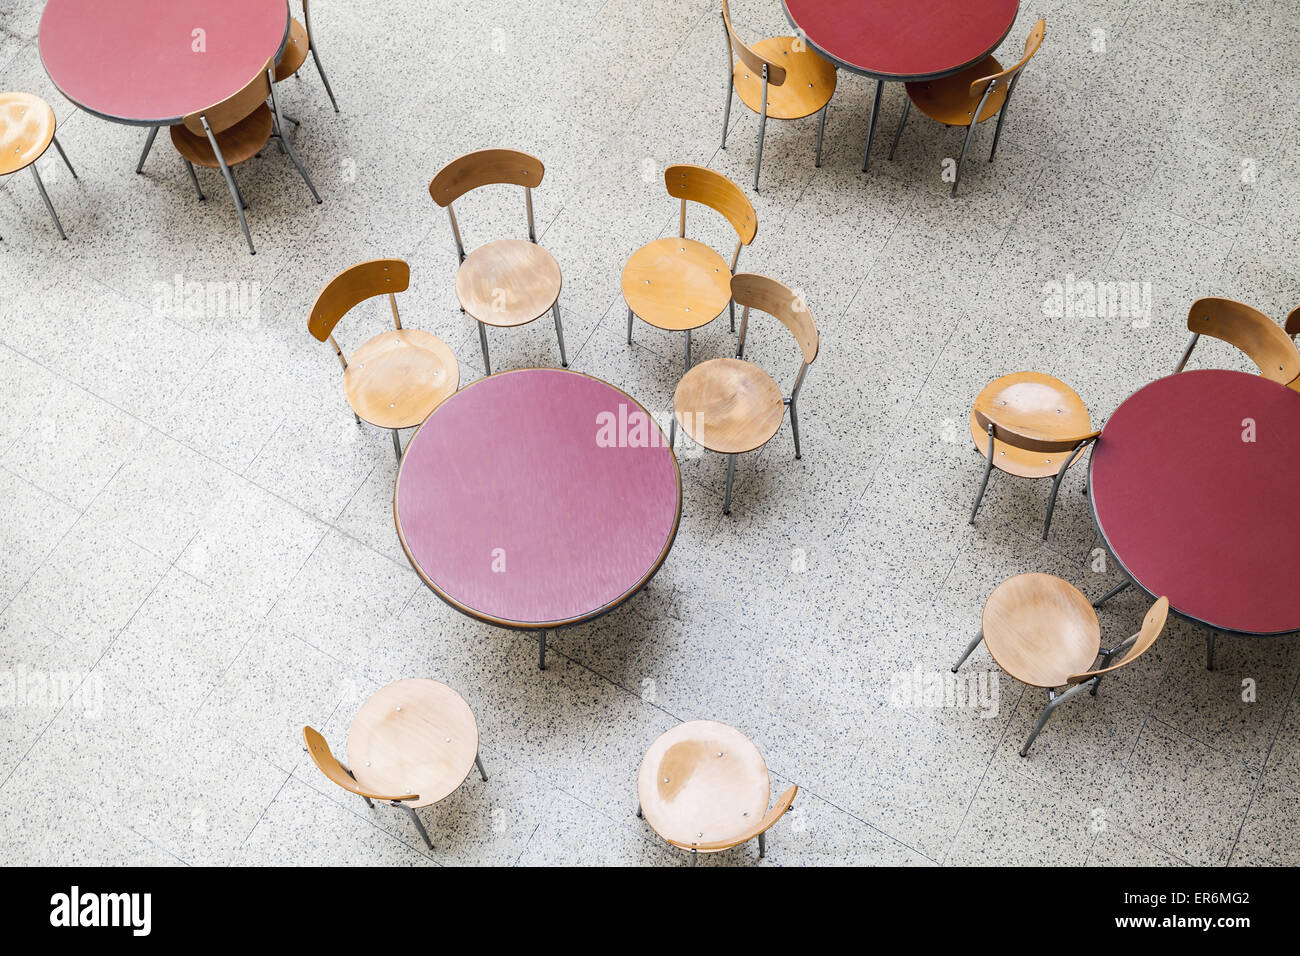 Round tables and chairs around stand in an empty cafe interior, top view Stock Photo